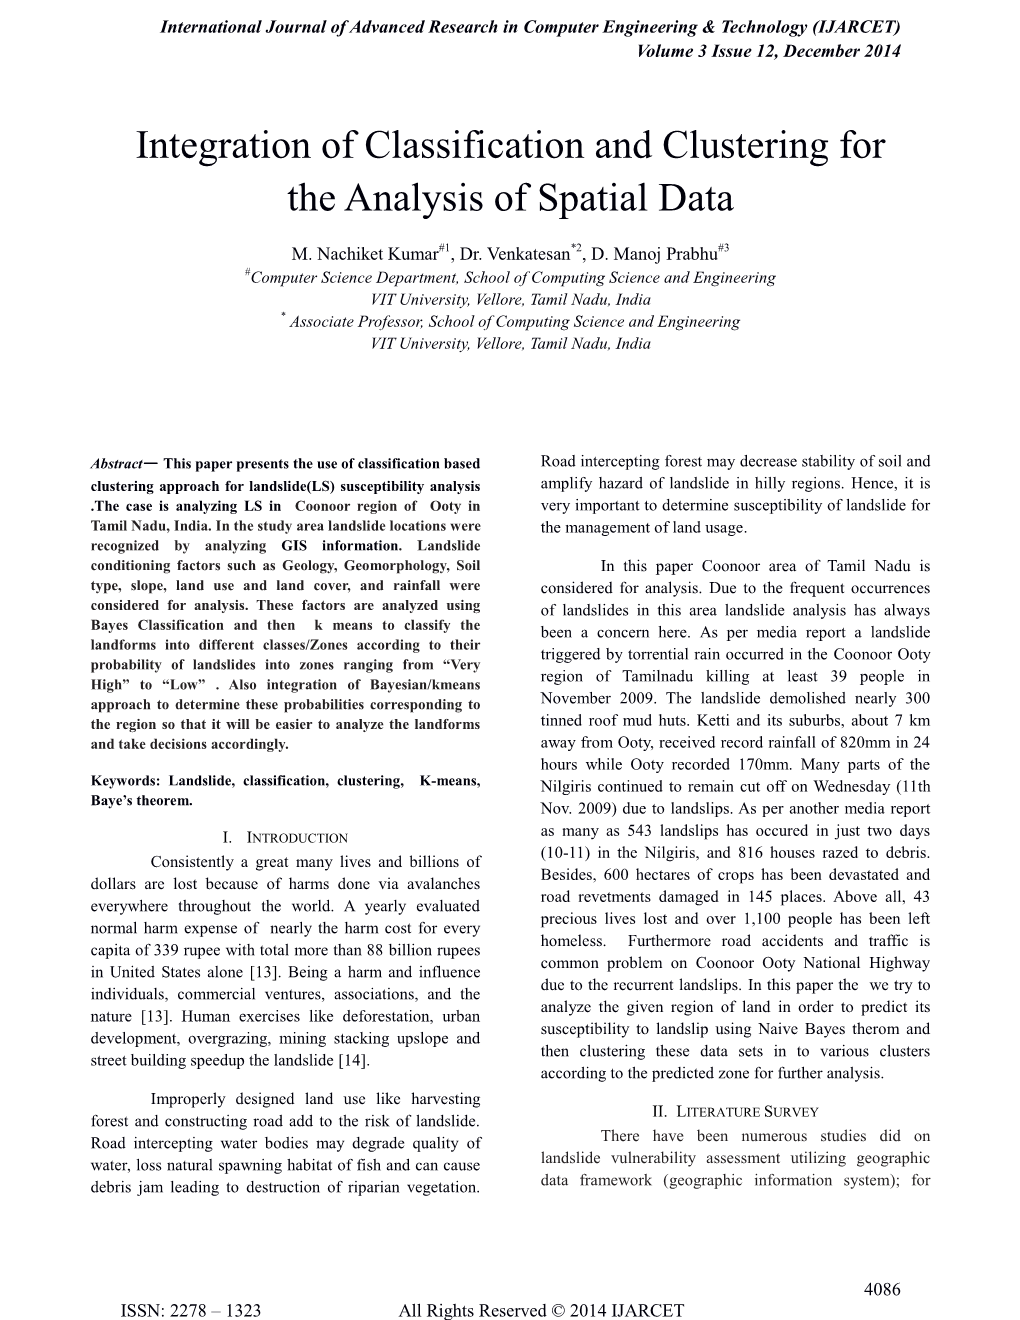 Integration of Classification and Clustering for the Analysis of Spatial Data